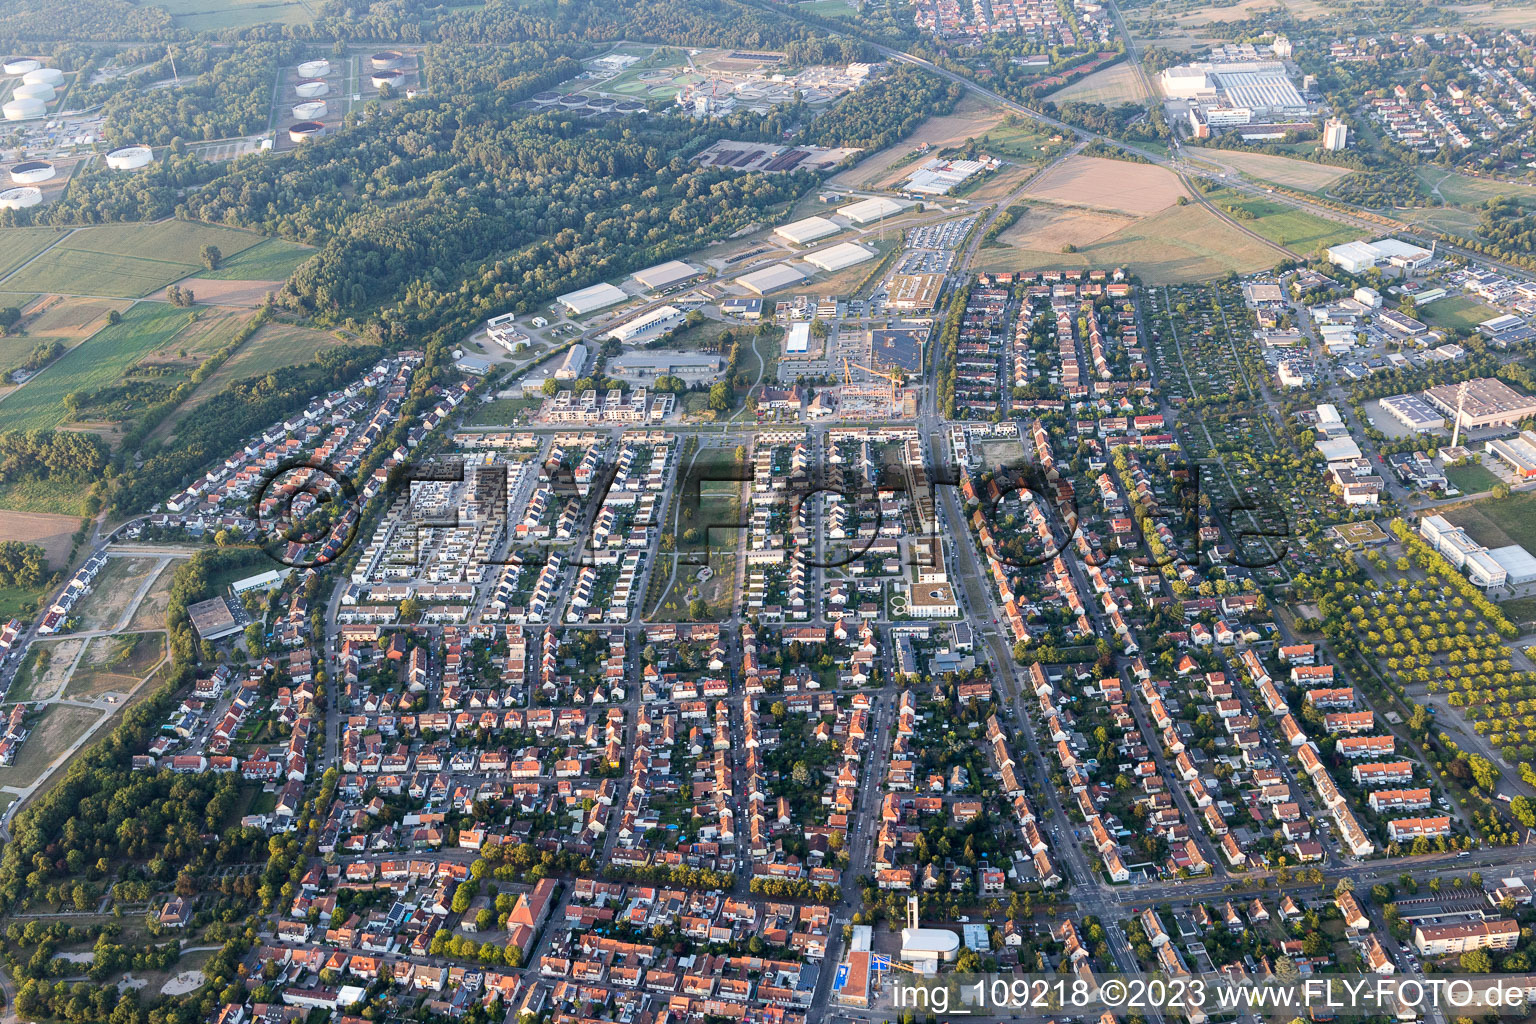 Drone image of District Knielingen in Karlsruhe in the state Baden-Wuerttemberg, Germany